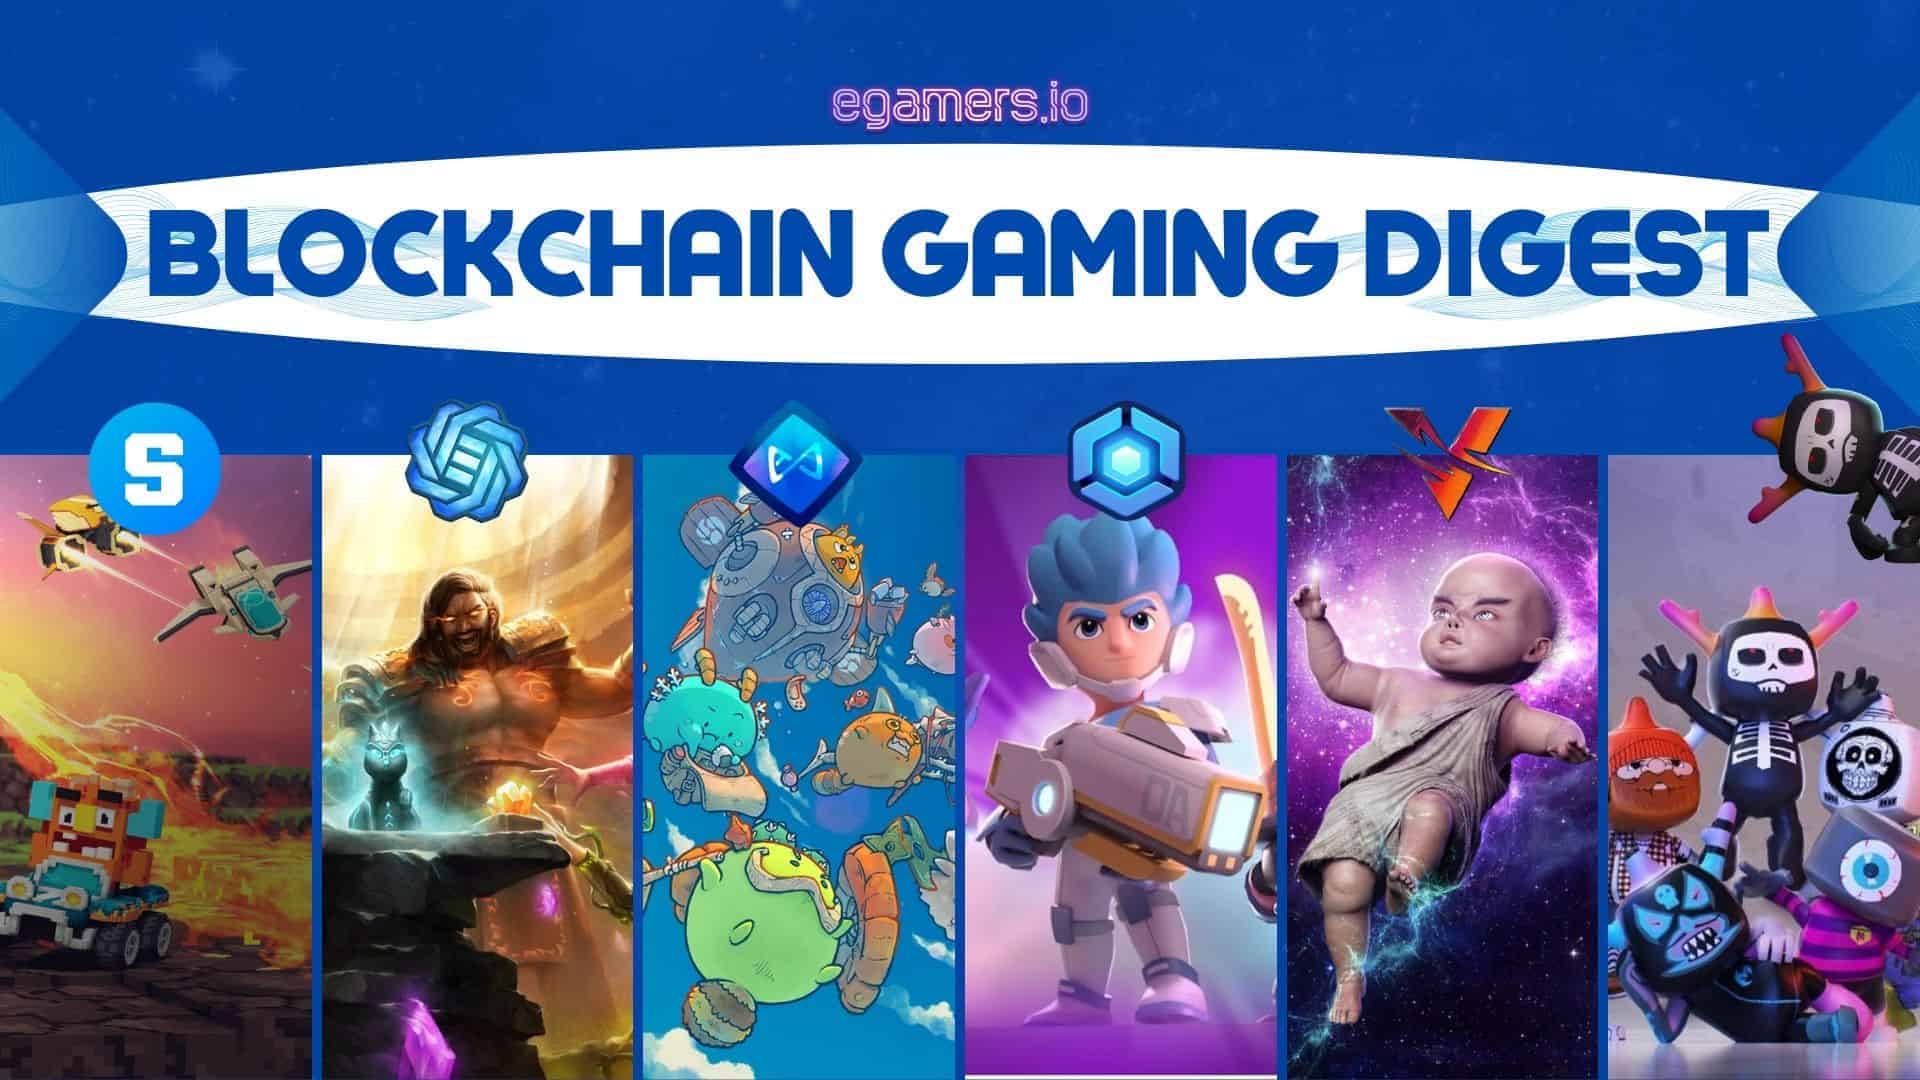 BLOCKCHAIN GAMING DIGEST new The Land presale of MyCryptoHeroes is active as of today for potential investors.